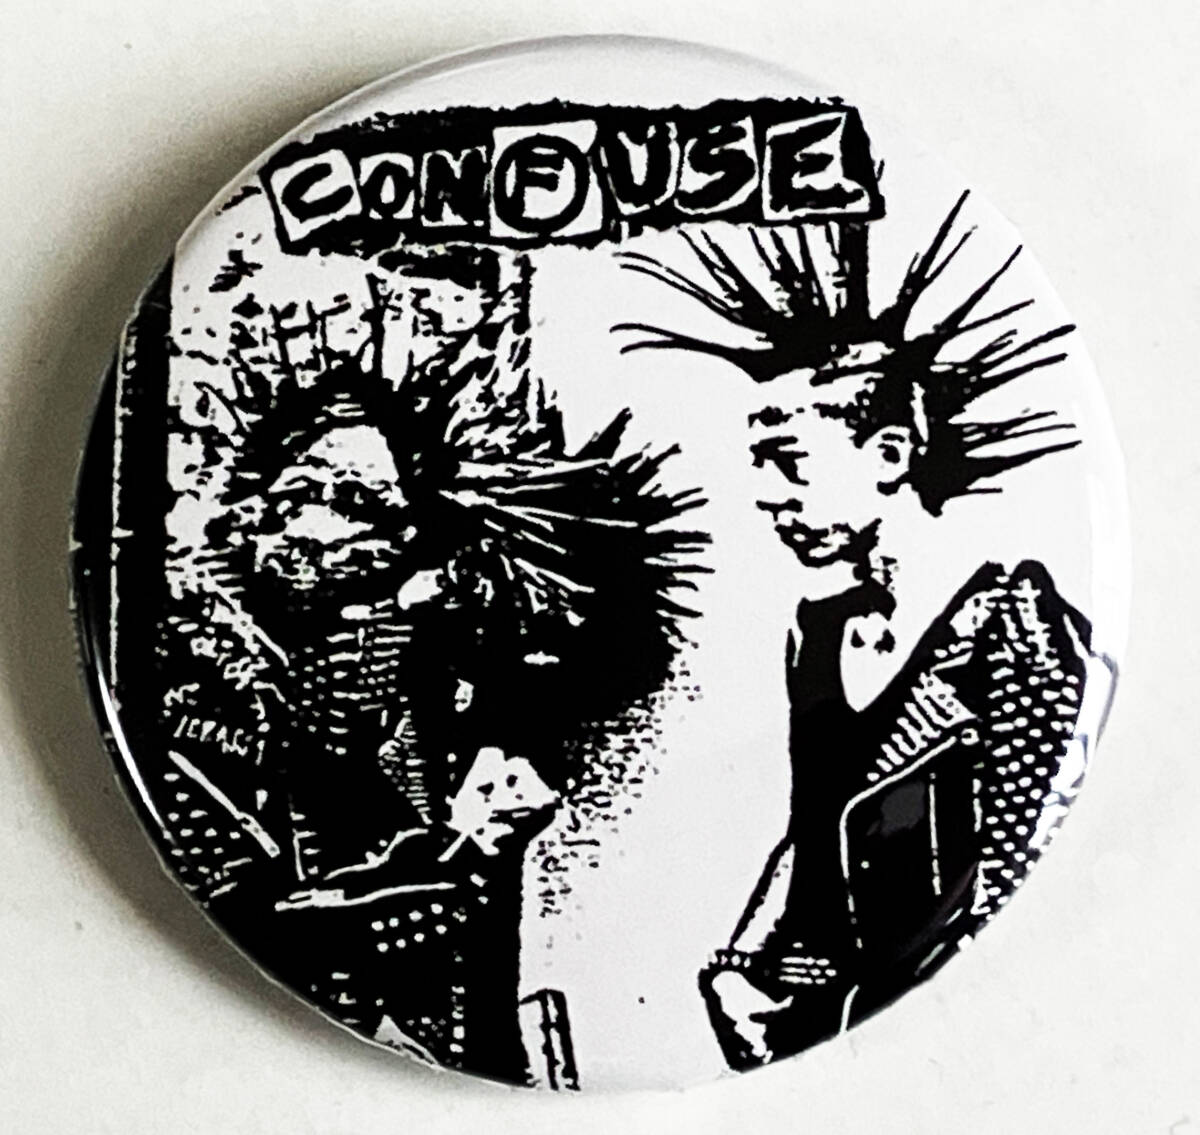 CONFUSE - Nuclear Addicts 缶バッジ 25mm #japanese #punk #80's cult killer punk rock #custom buttonsの画像1